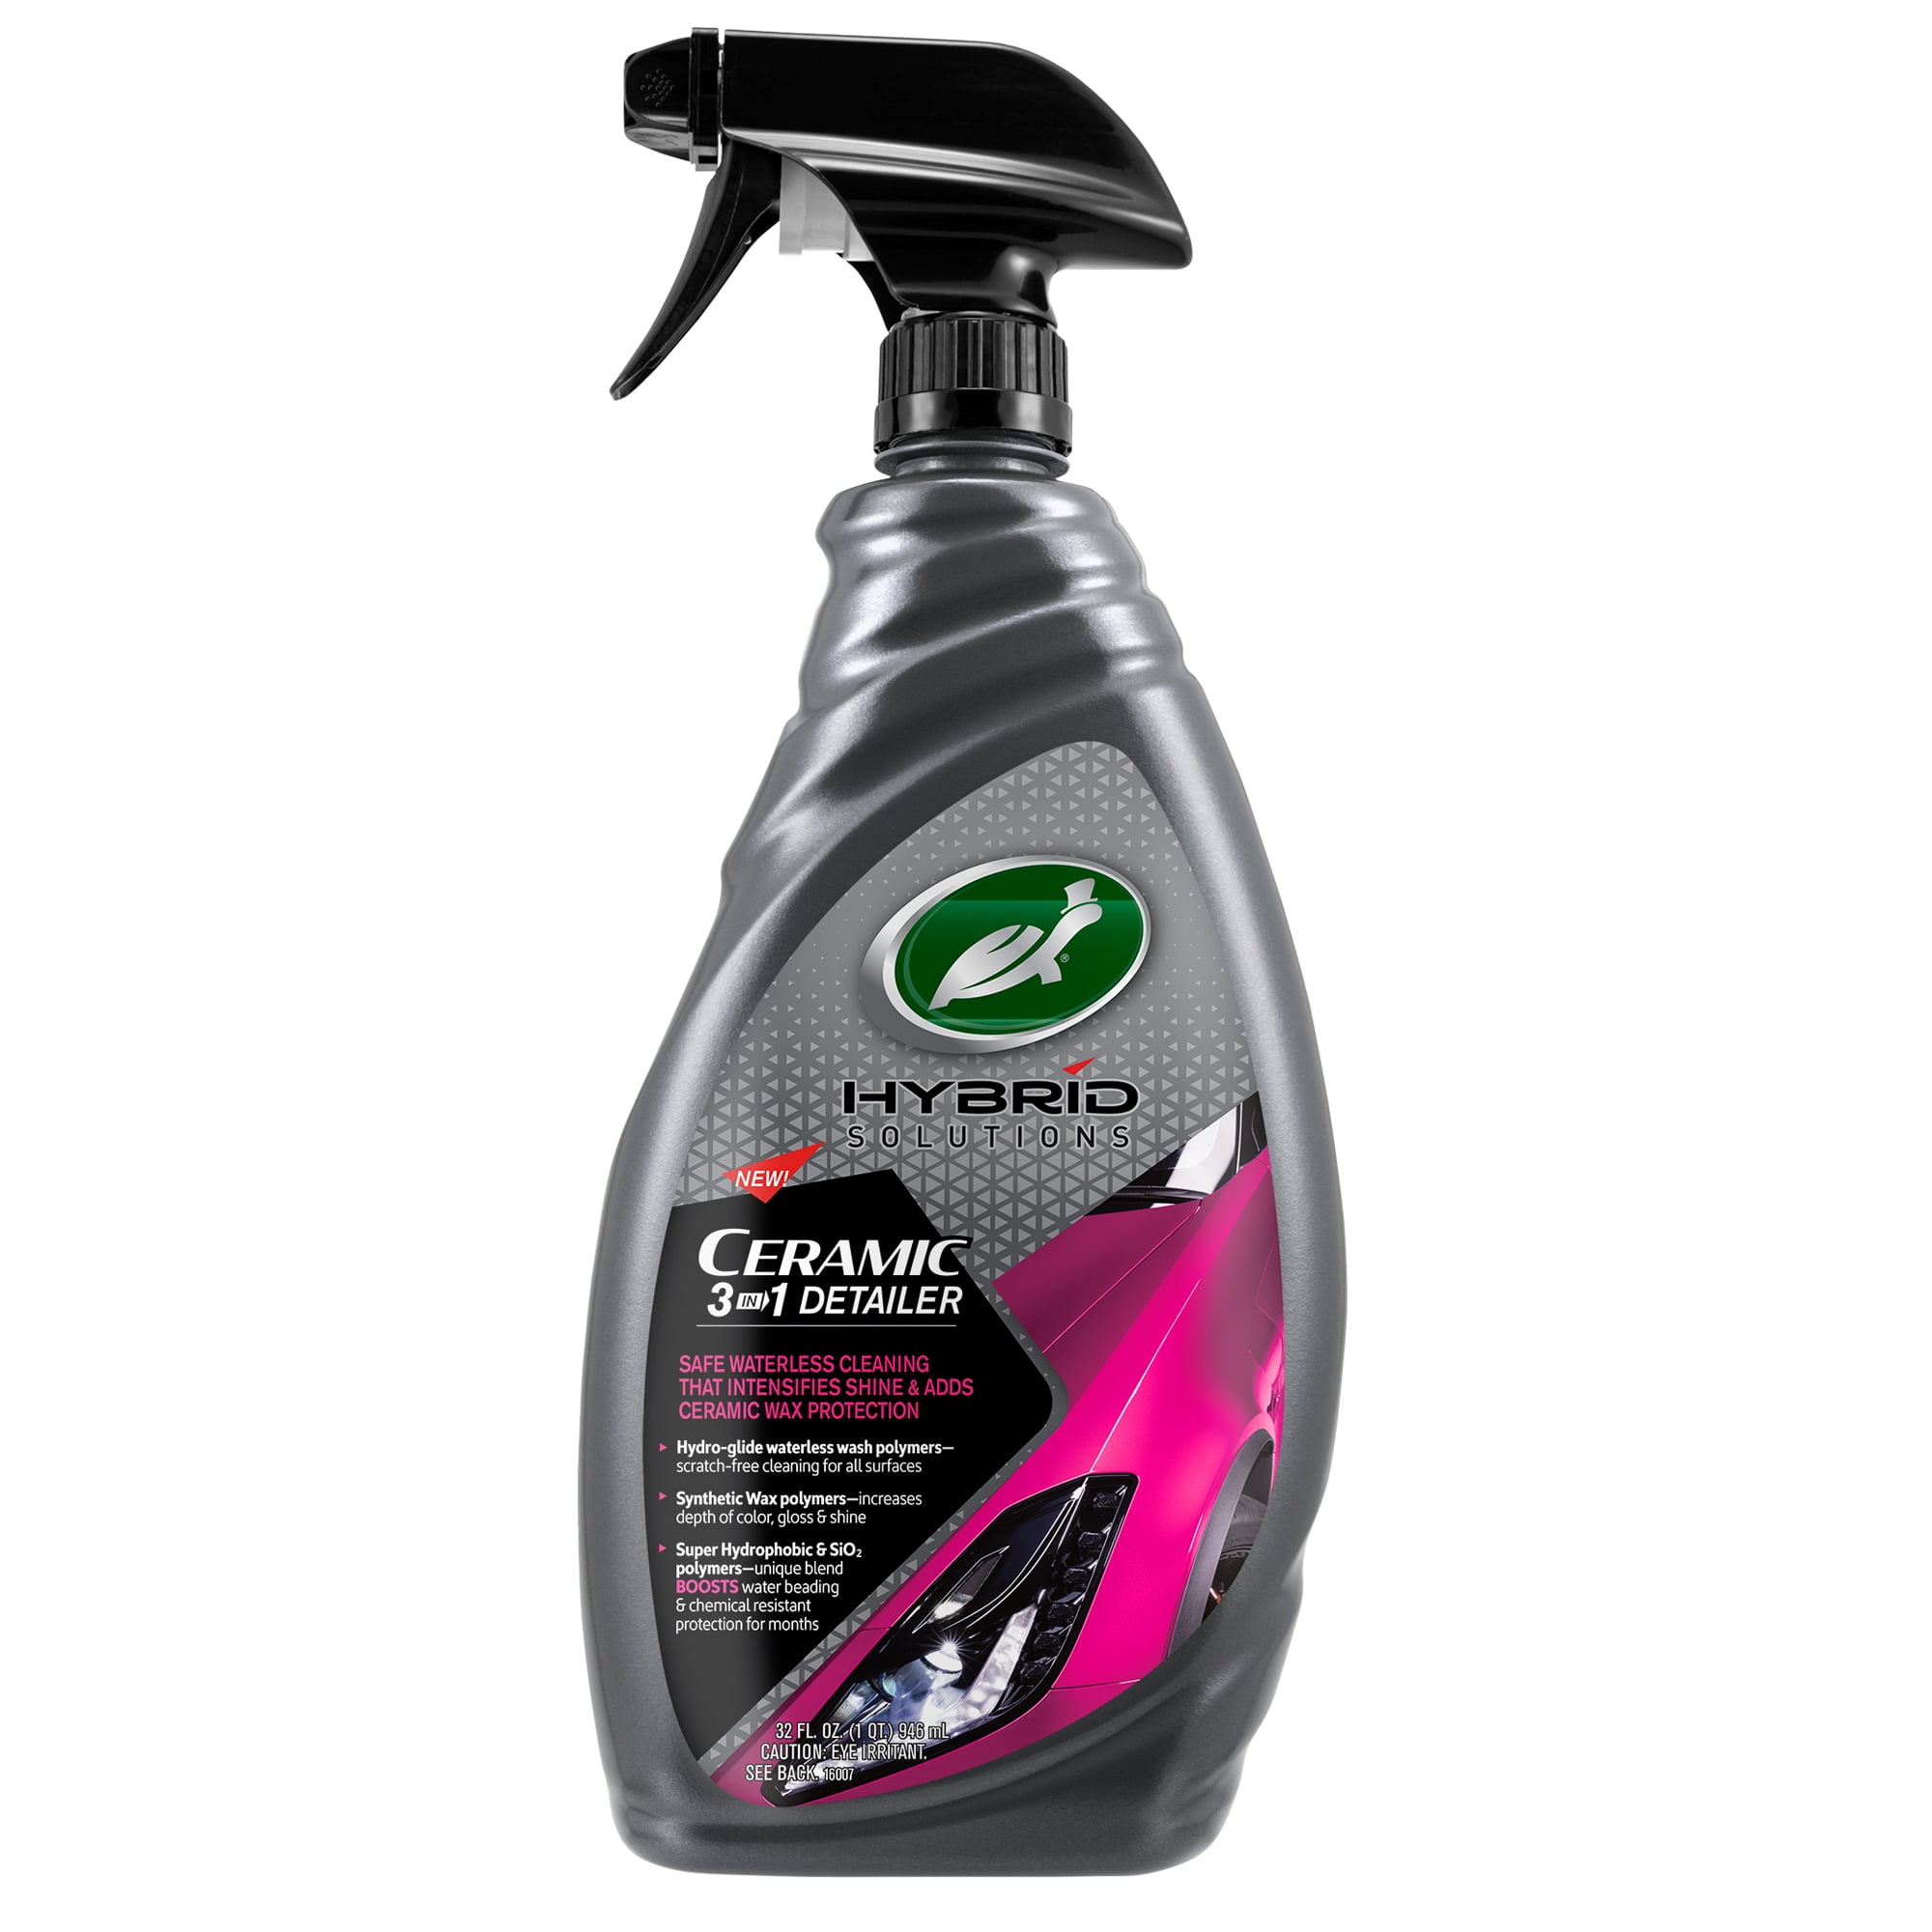  Turtle Wax 53413 Hybrid Solutions Ceramic 3-in-1